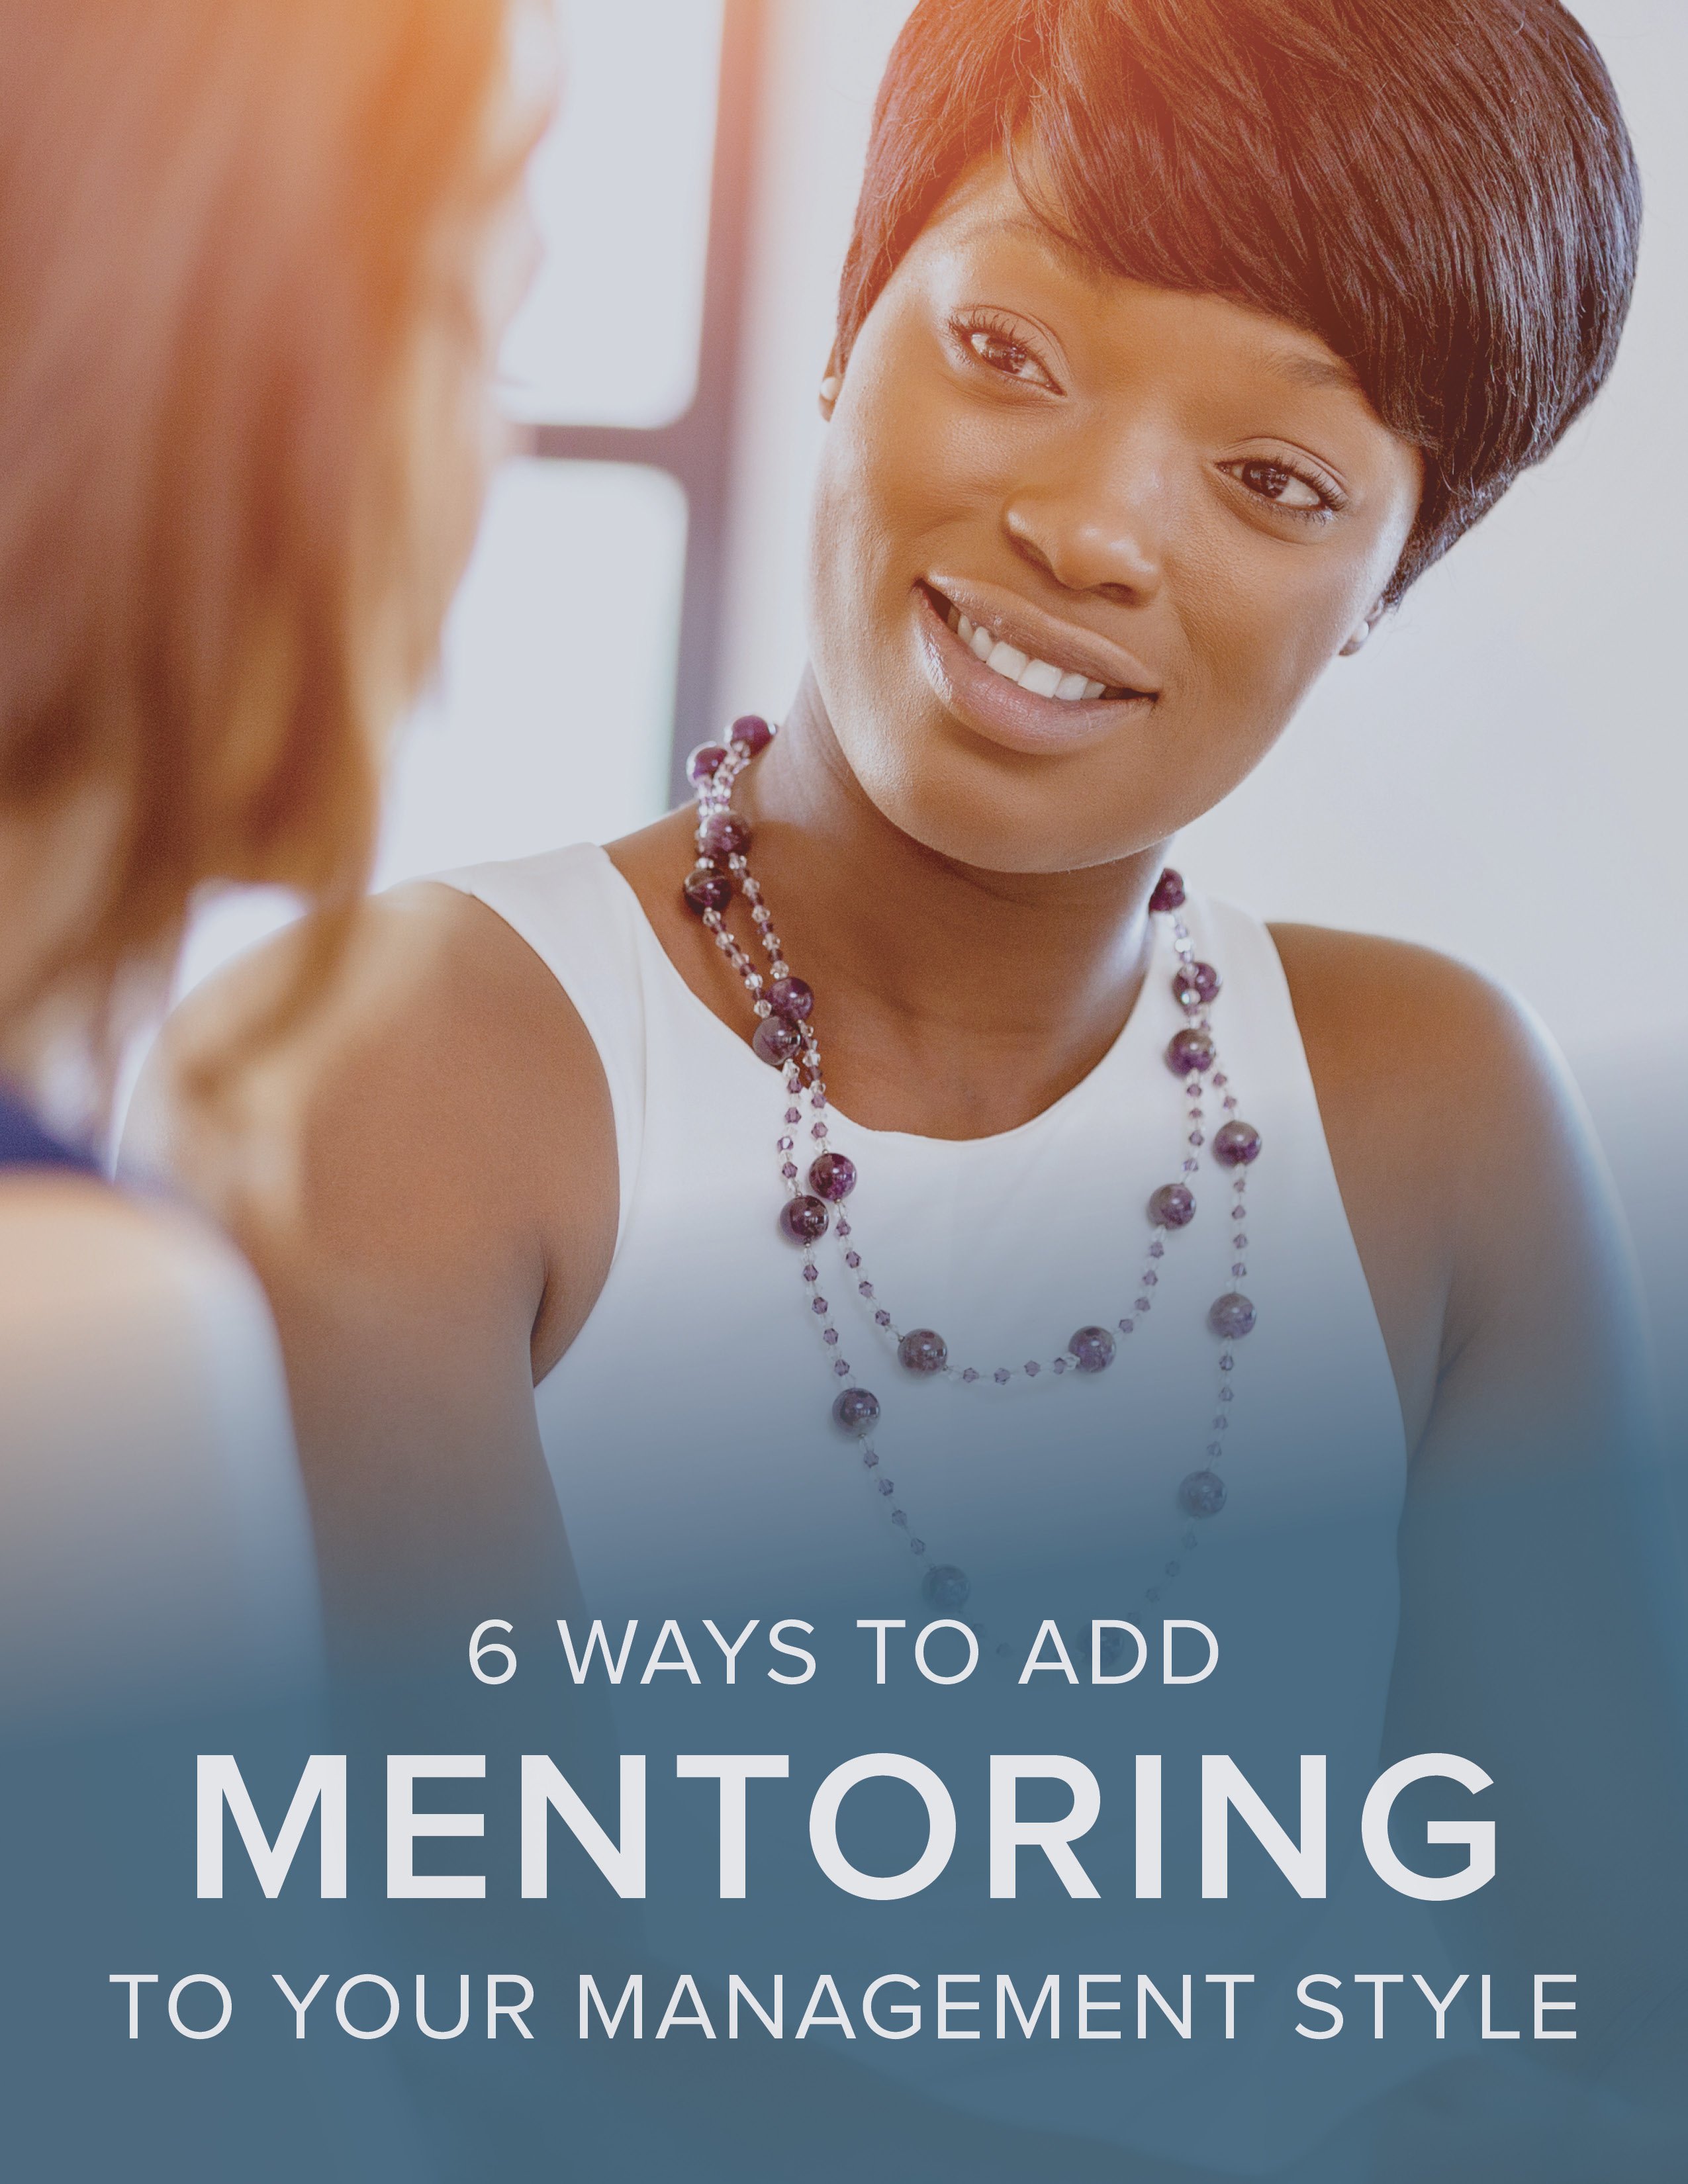 NEOED 6 Ways to Add Mentoring to Your Management Style